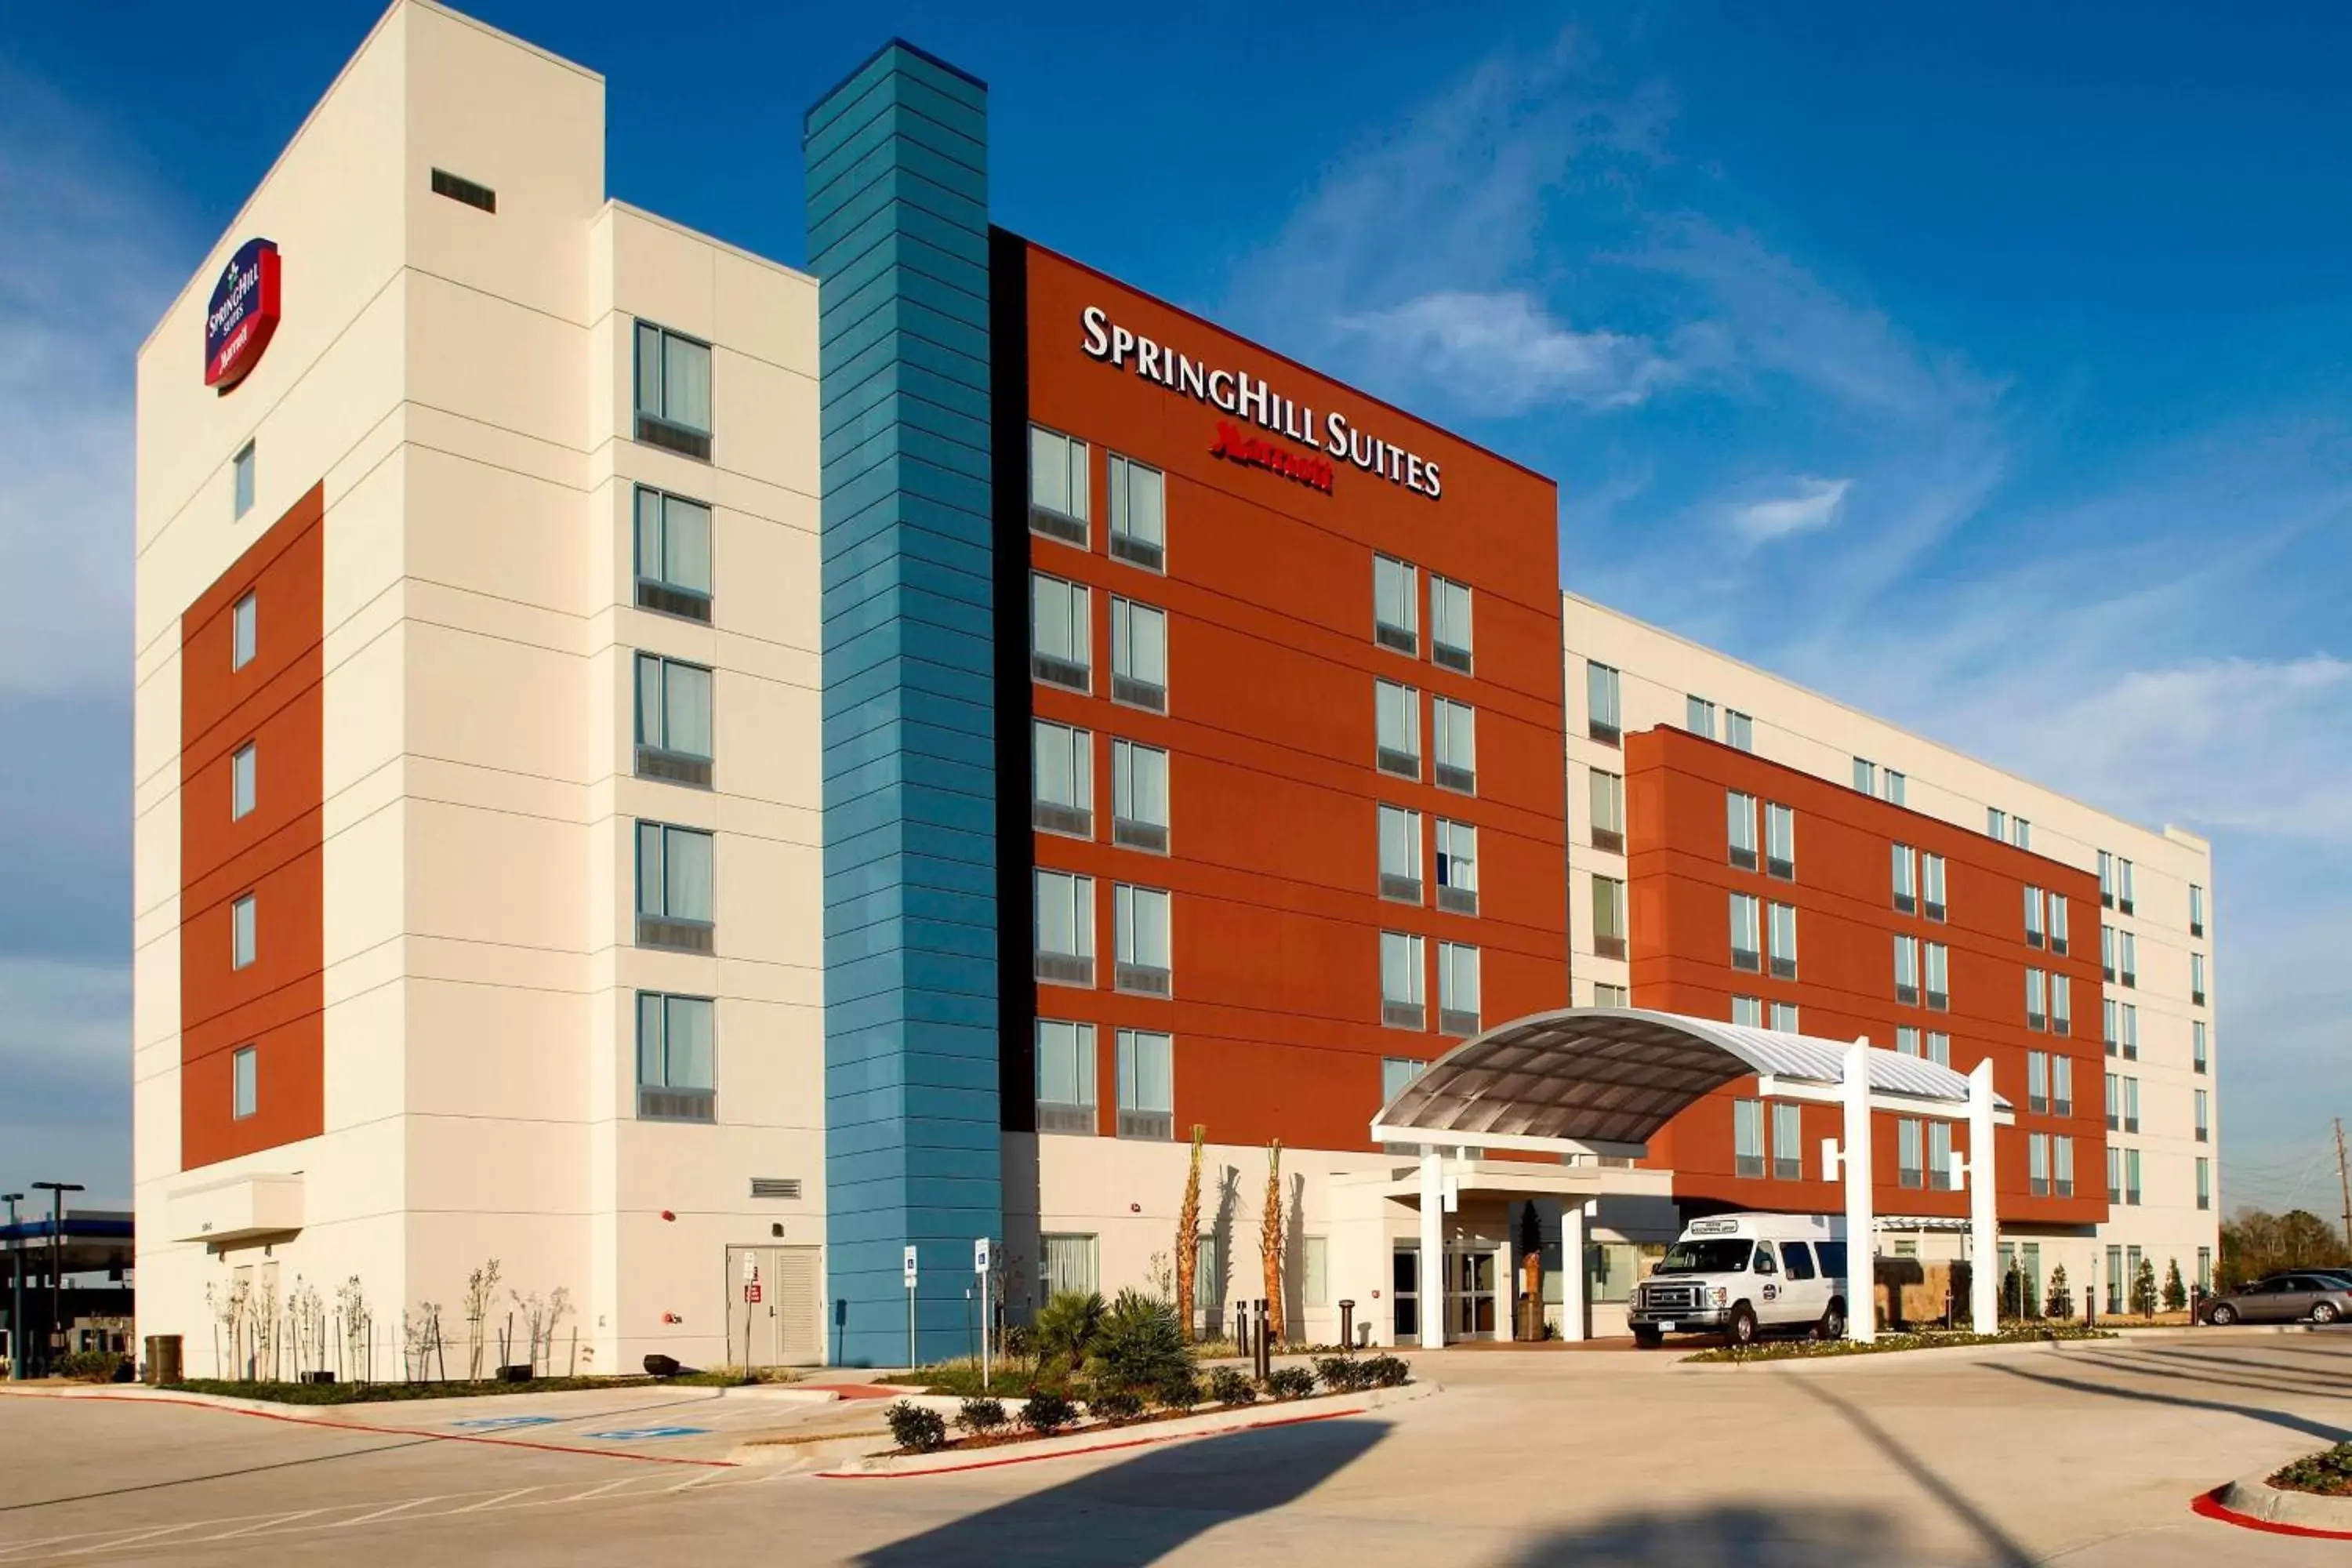 Property Building in SpringHill Suites Houston Intercontinental Airport